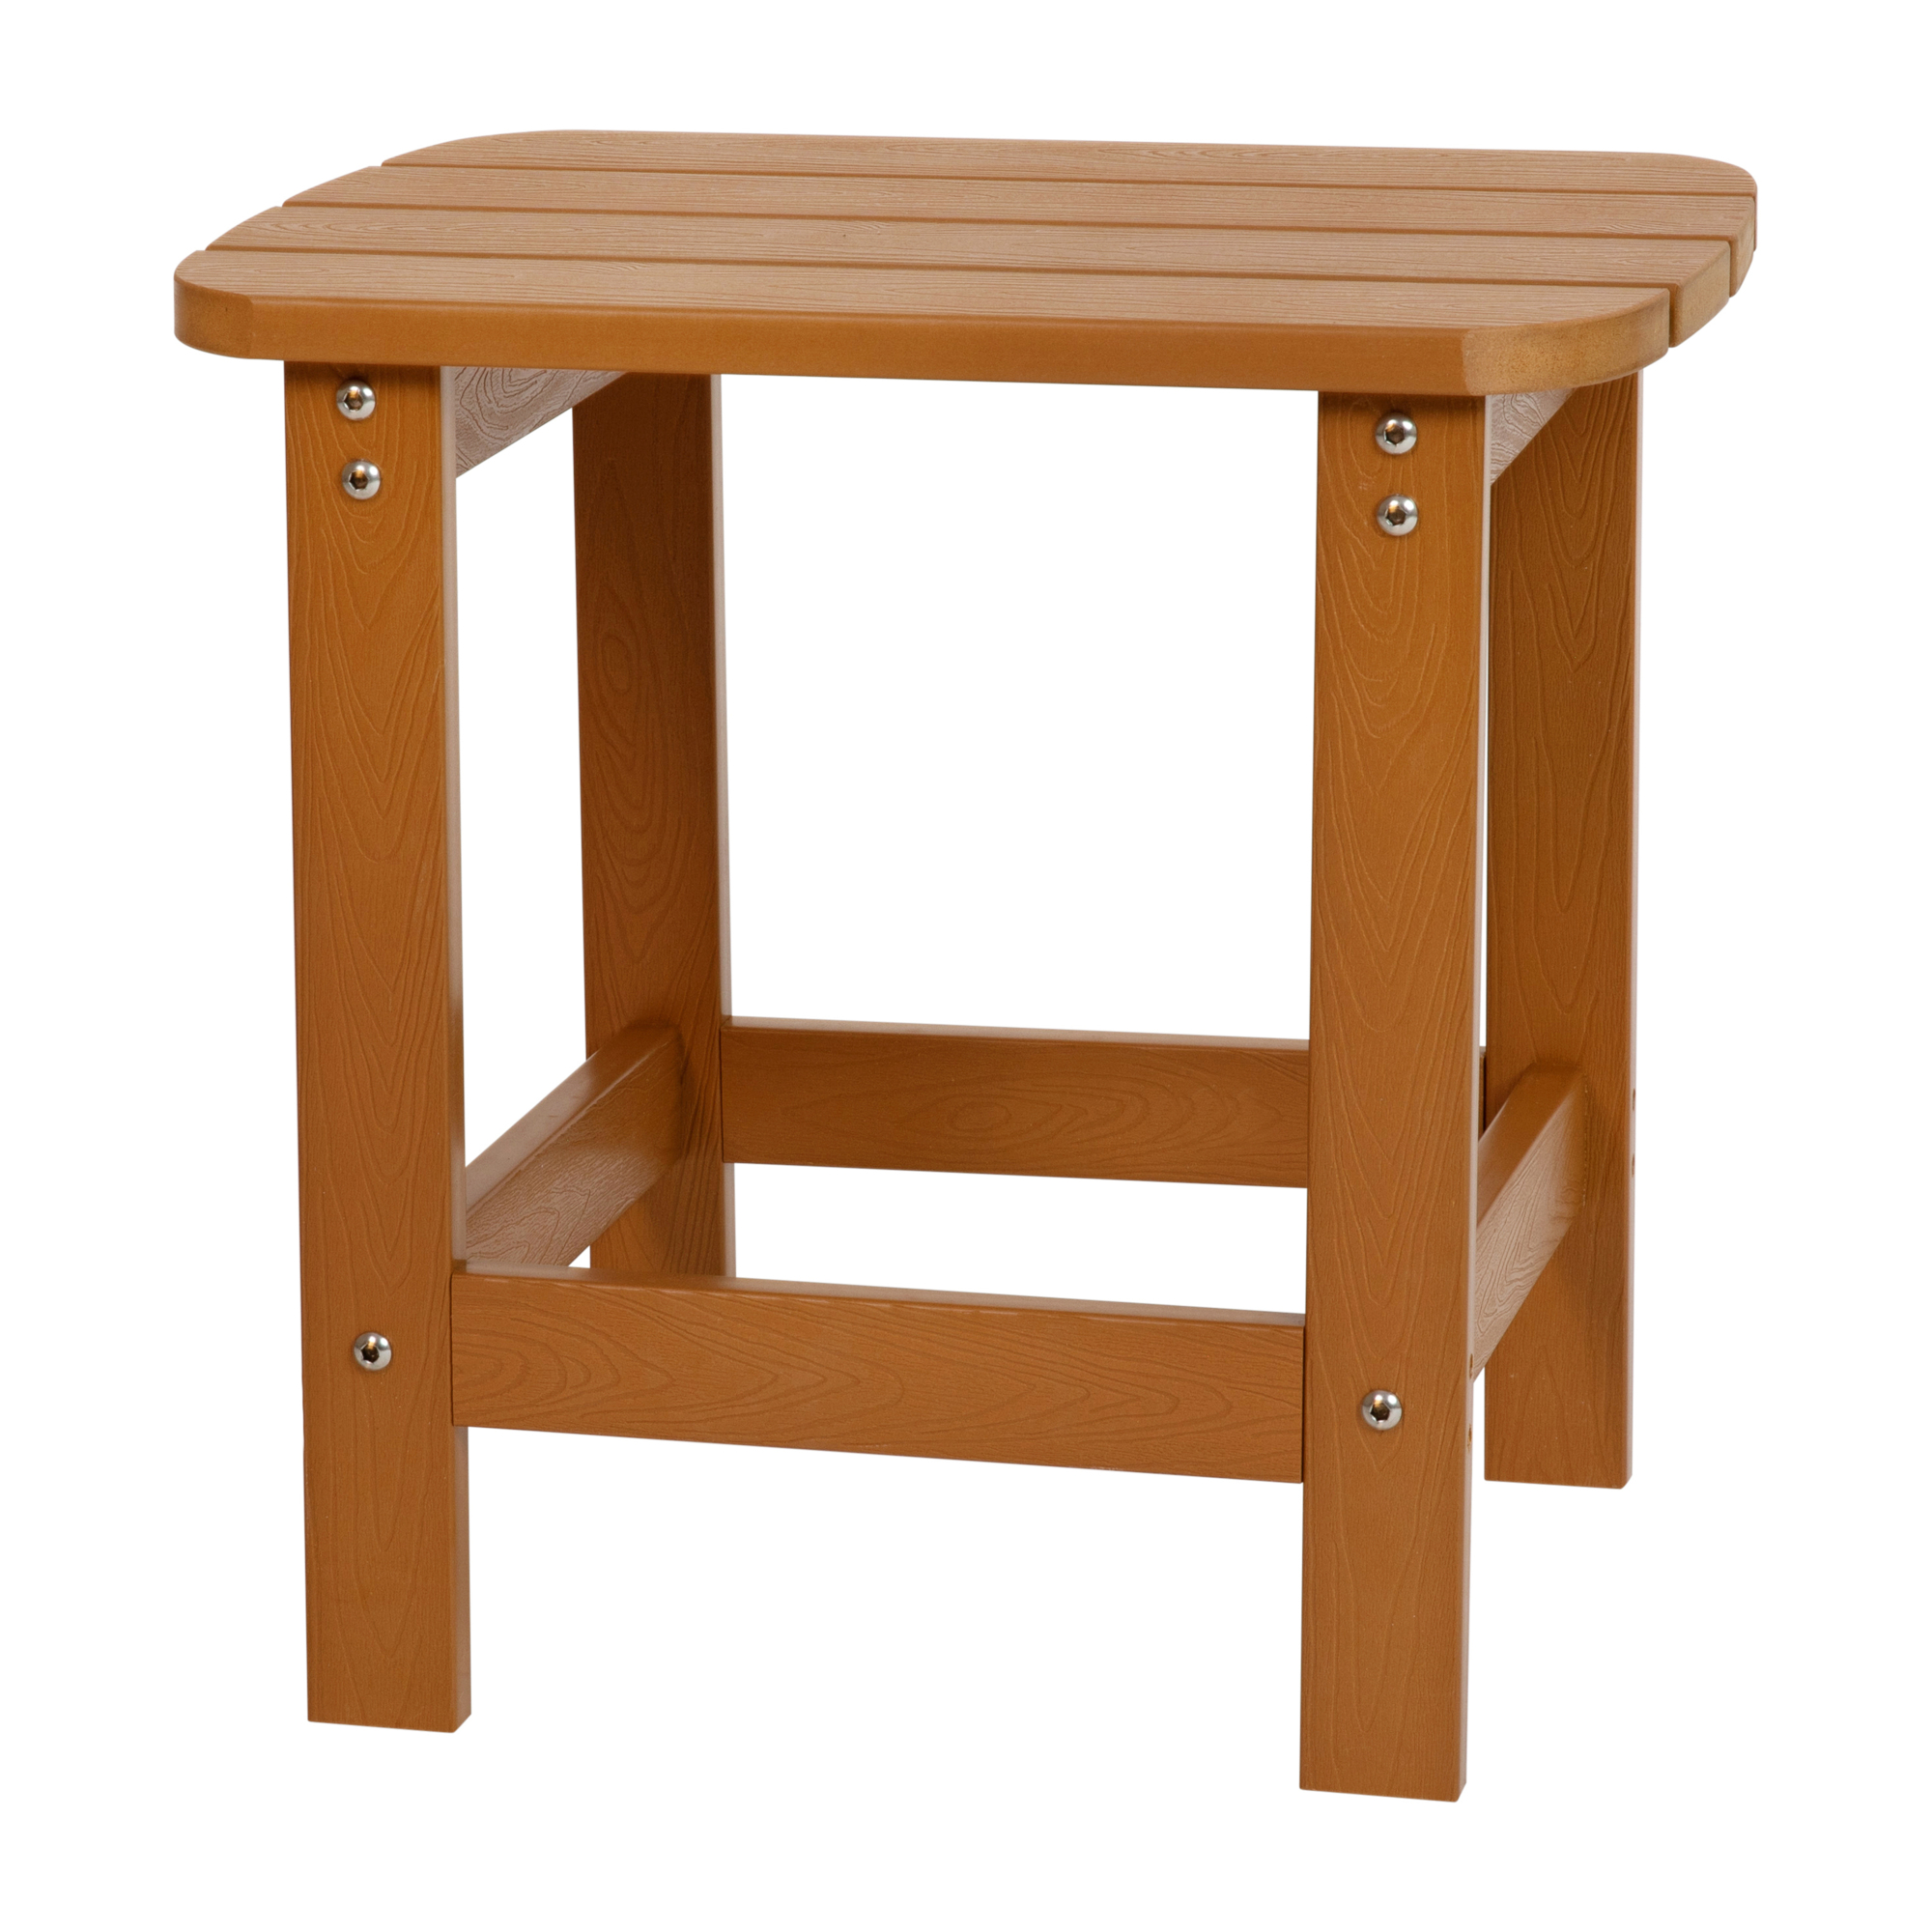 Flash Furniture, Teak All-Weather Adirondack Side Table, Table Shape Rectangle, Primary Color Brown, Height 18.25 in, Model JJT14001TEAK